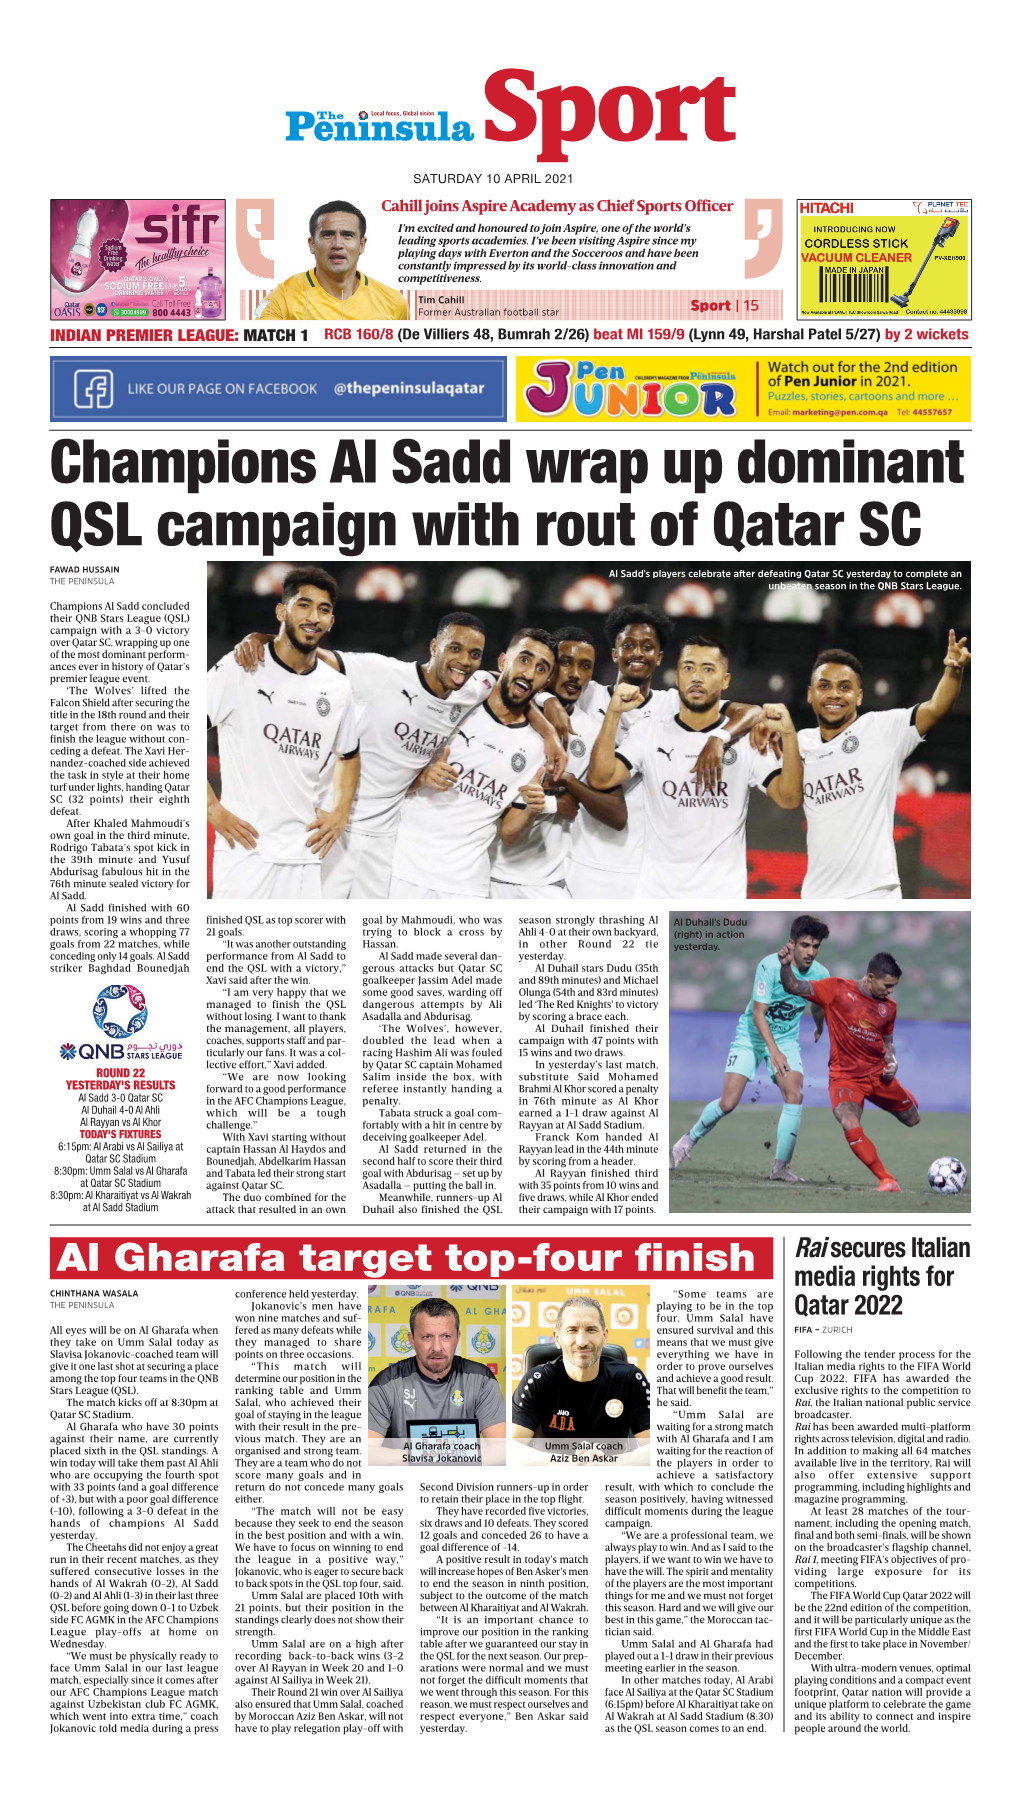 Champions Al Sadd Wrap up Dominant QSL Campaign with Rout of Qatar SC